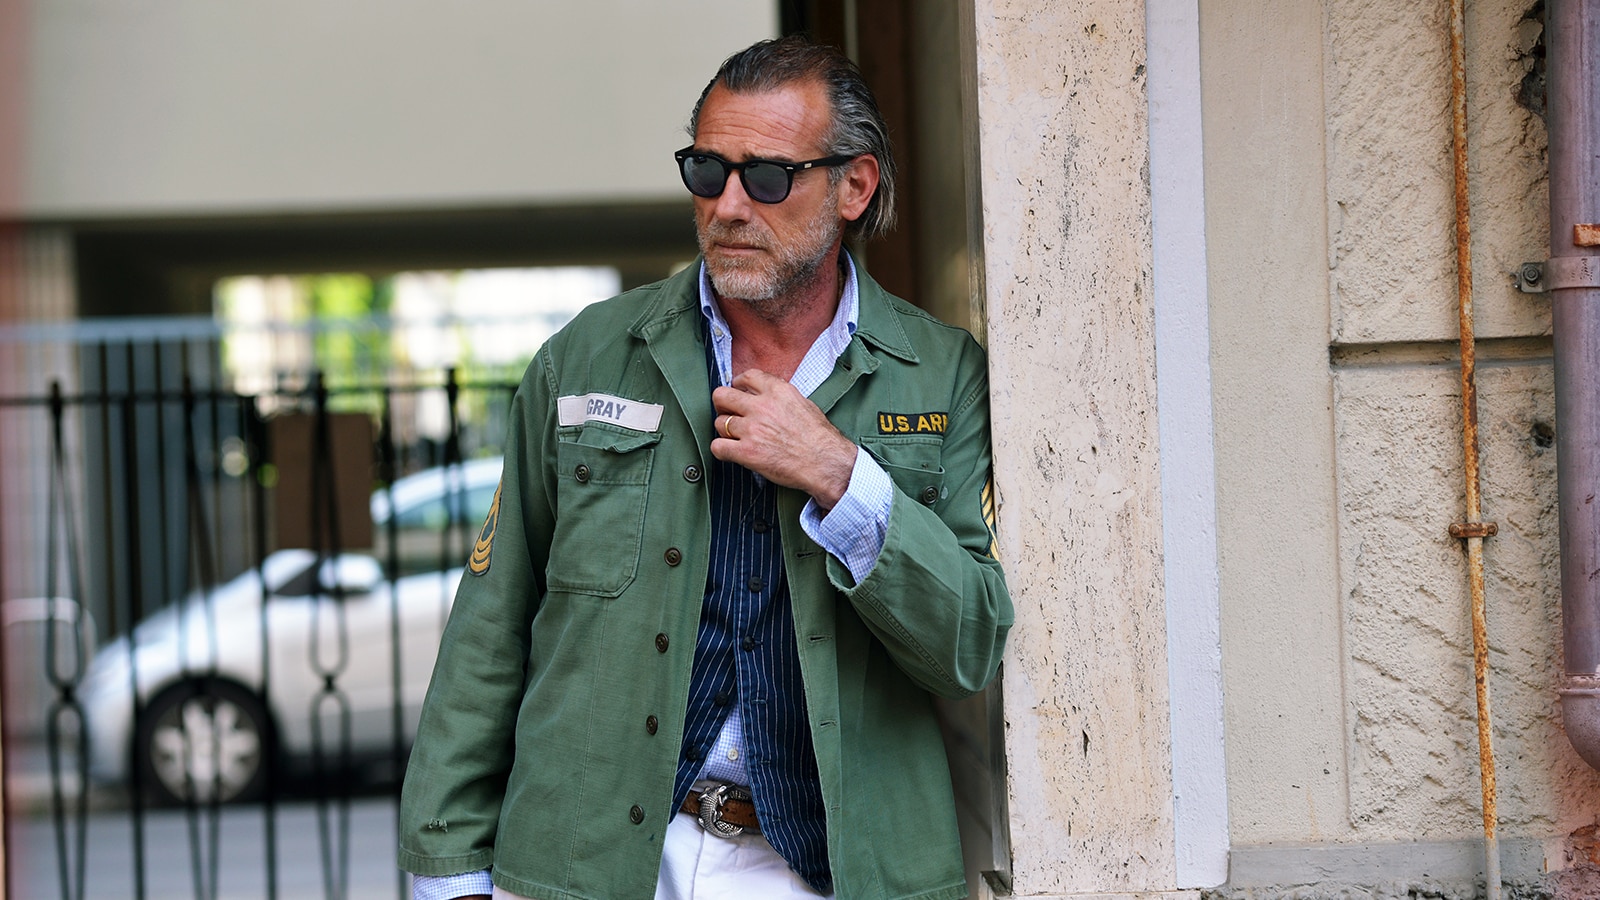 Style Tips From Florence's Best Dressed | The Journal | MR PORTER